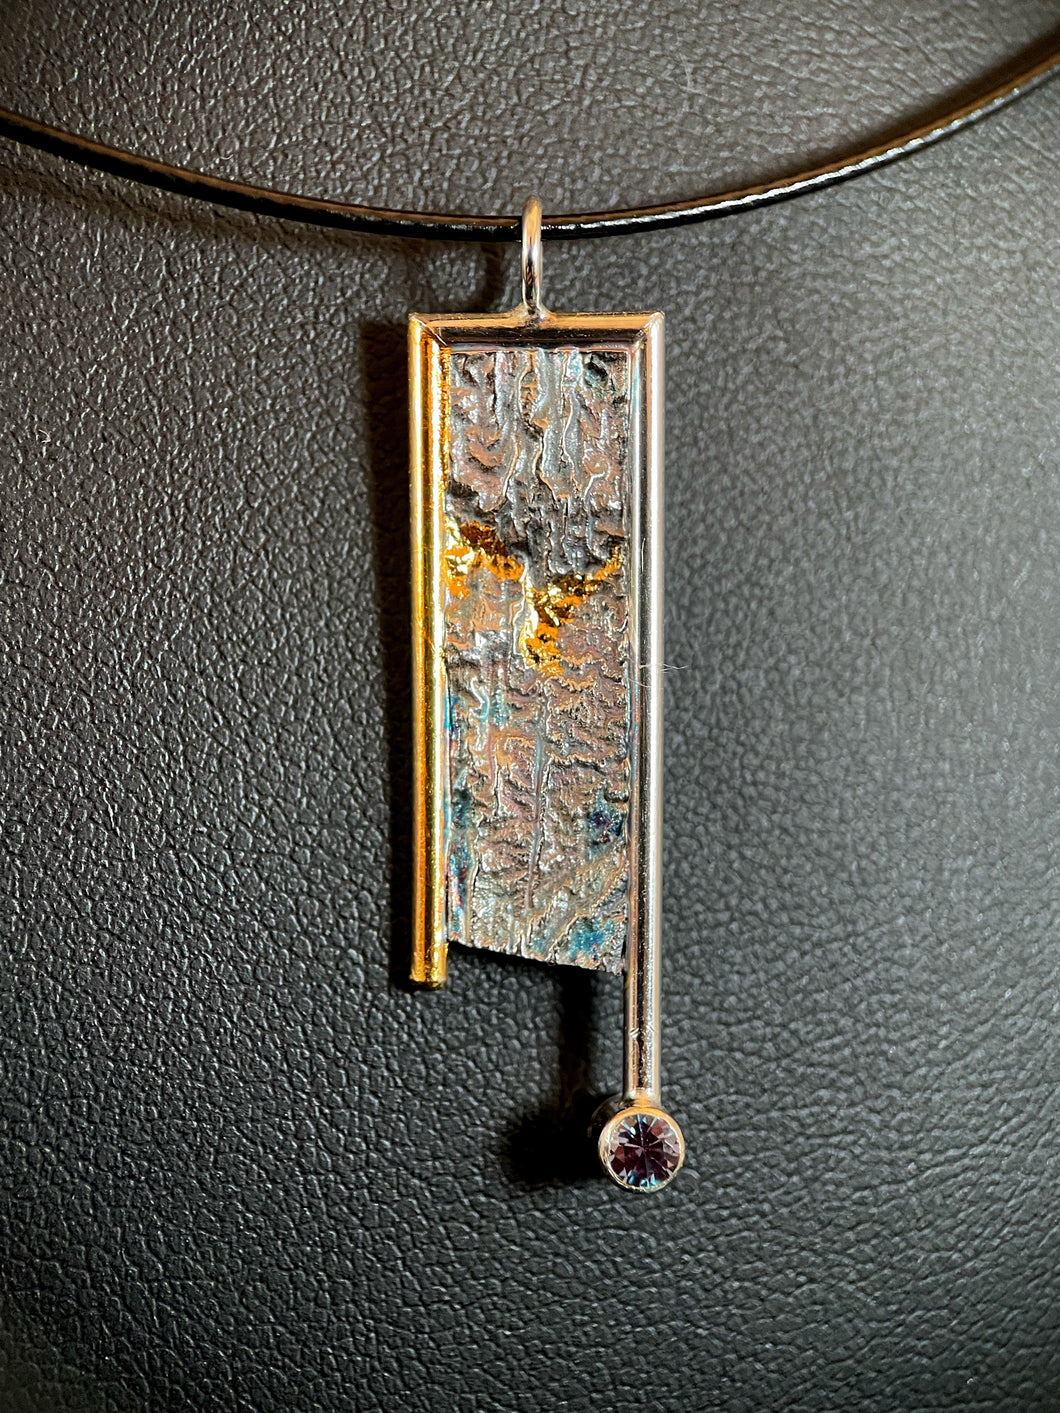 A rectangular silver necklace, handing vertically. The silver is textured in a terrain-like pattern. The necklace is framed on the top and sides in wire - gold on the left side, the rest in silver. Both side wires continue below the body of the piece, moreso on the right side, which also terminates in a lab-grown alexandrite gemstone. There are small pools of gold in some of the recessed portions of the texture.